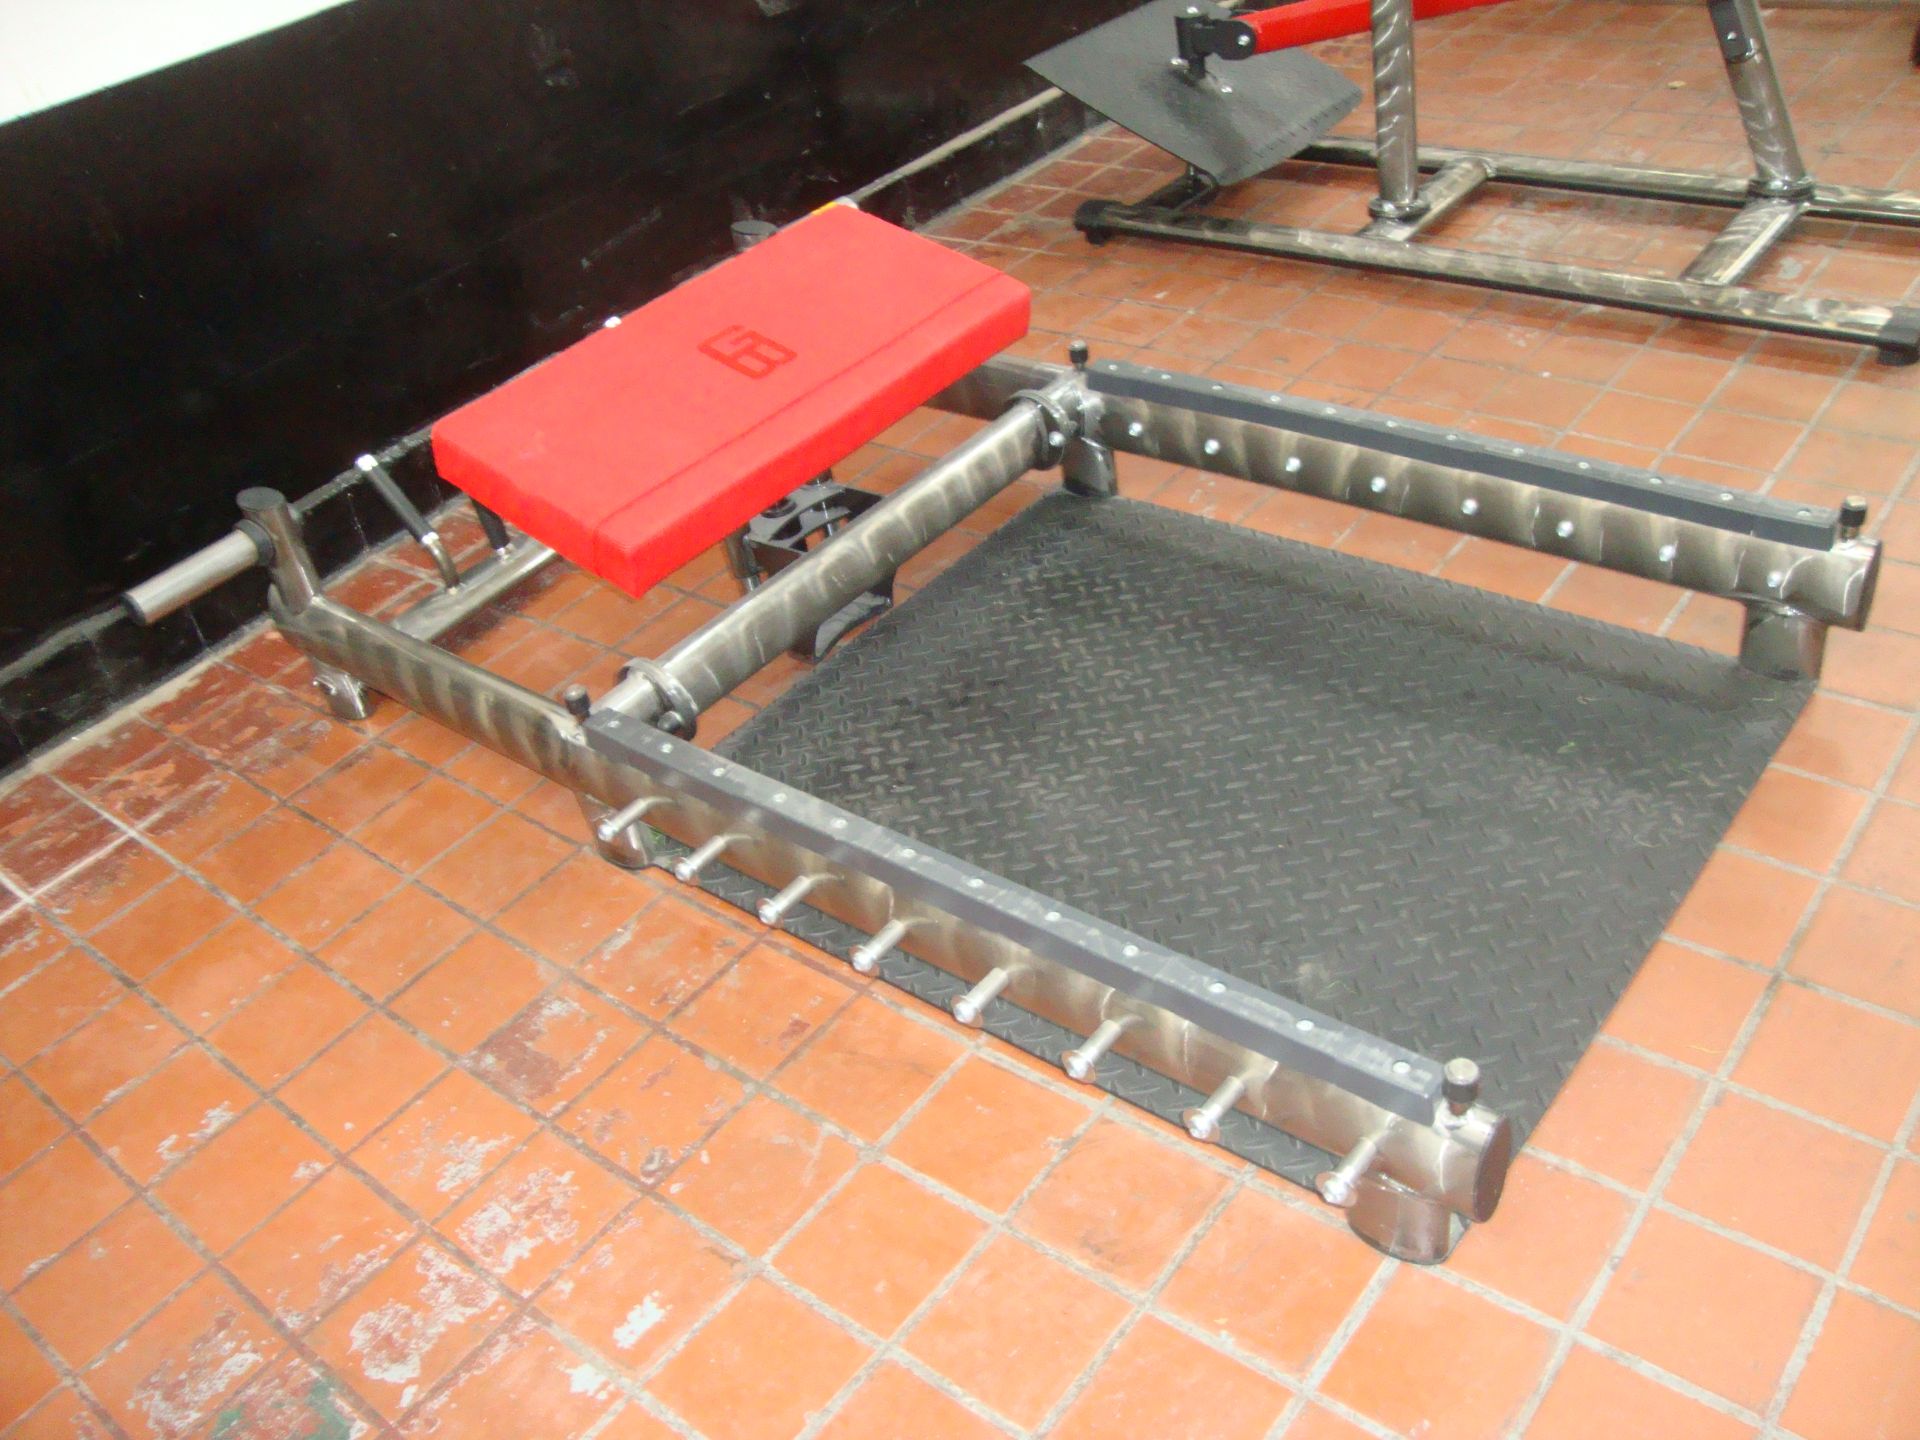 Gym 80 Sygnum glute builder, with silver frame & red upholstery, understood to have been purchased - Image 6 of 6